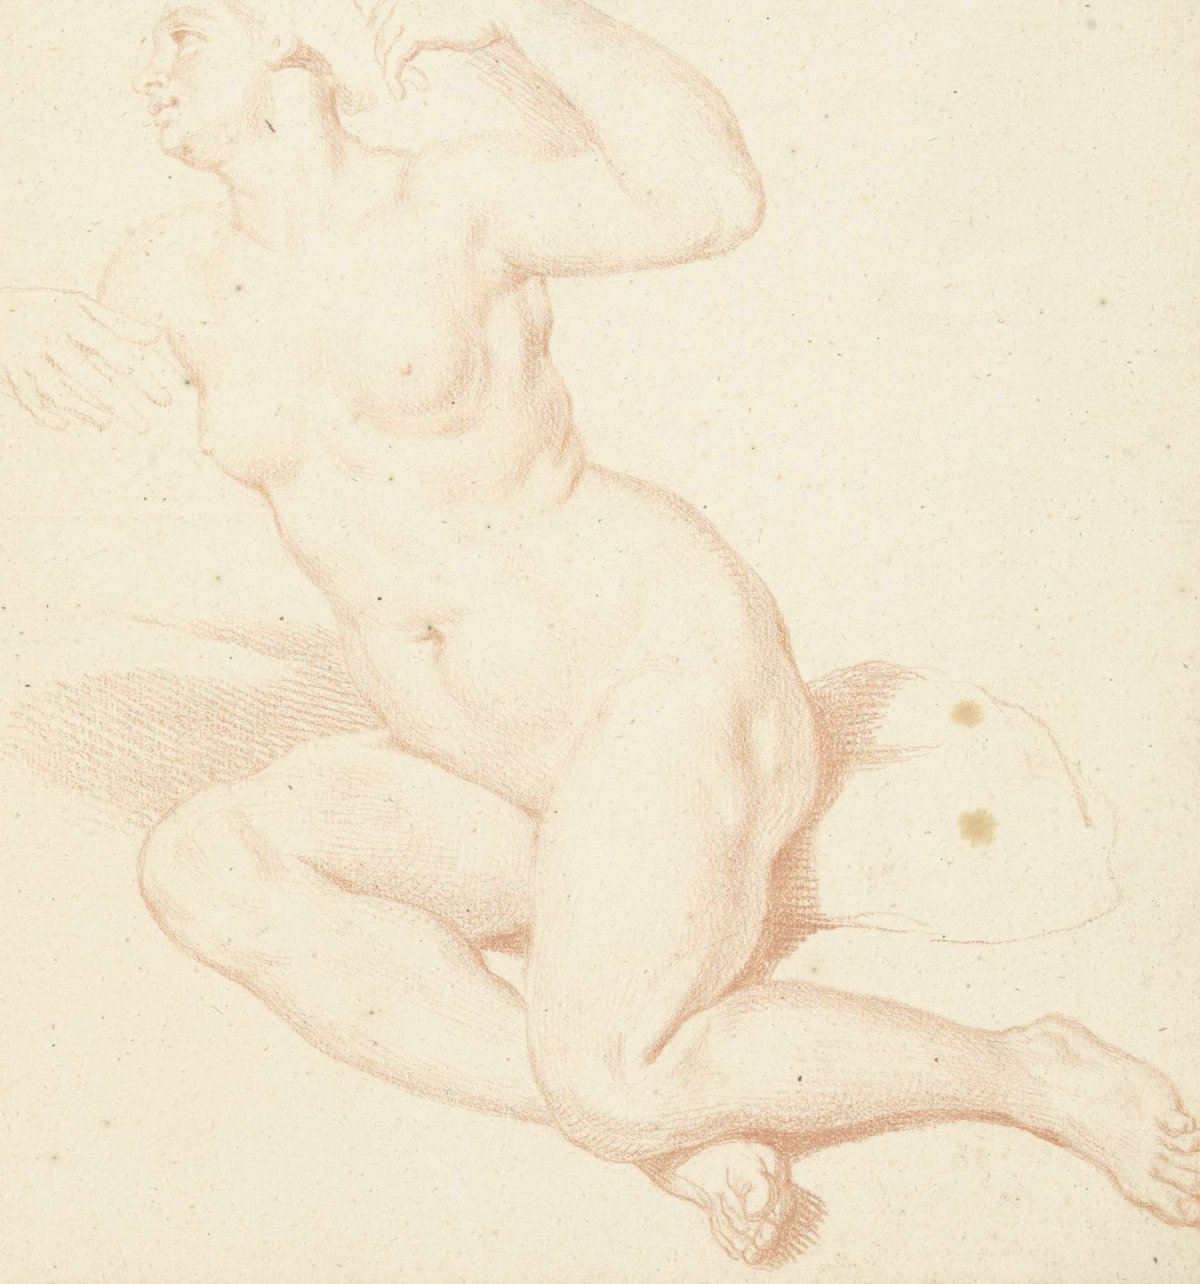 Study of a seated female nude, Louis Fabritius Dubourg, 1703 - 1775